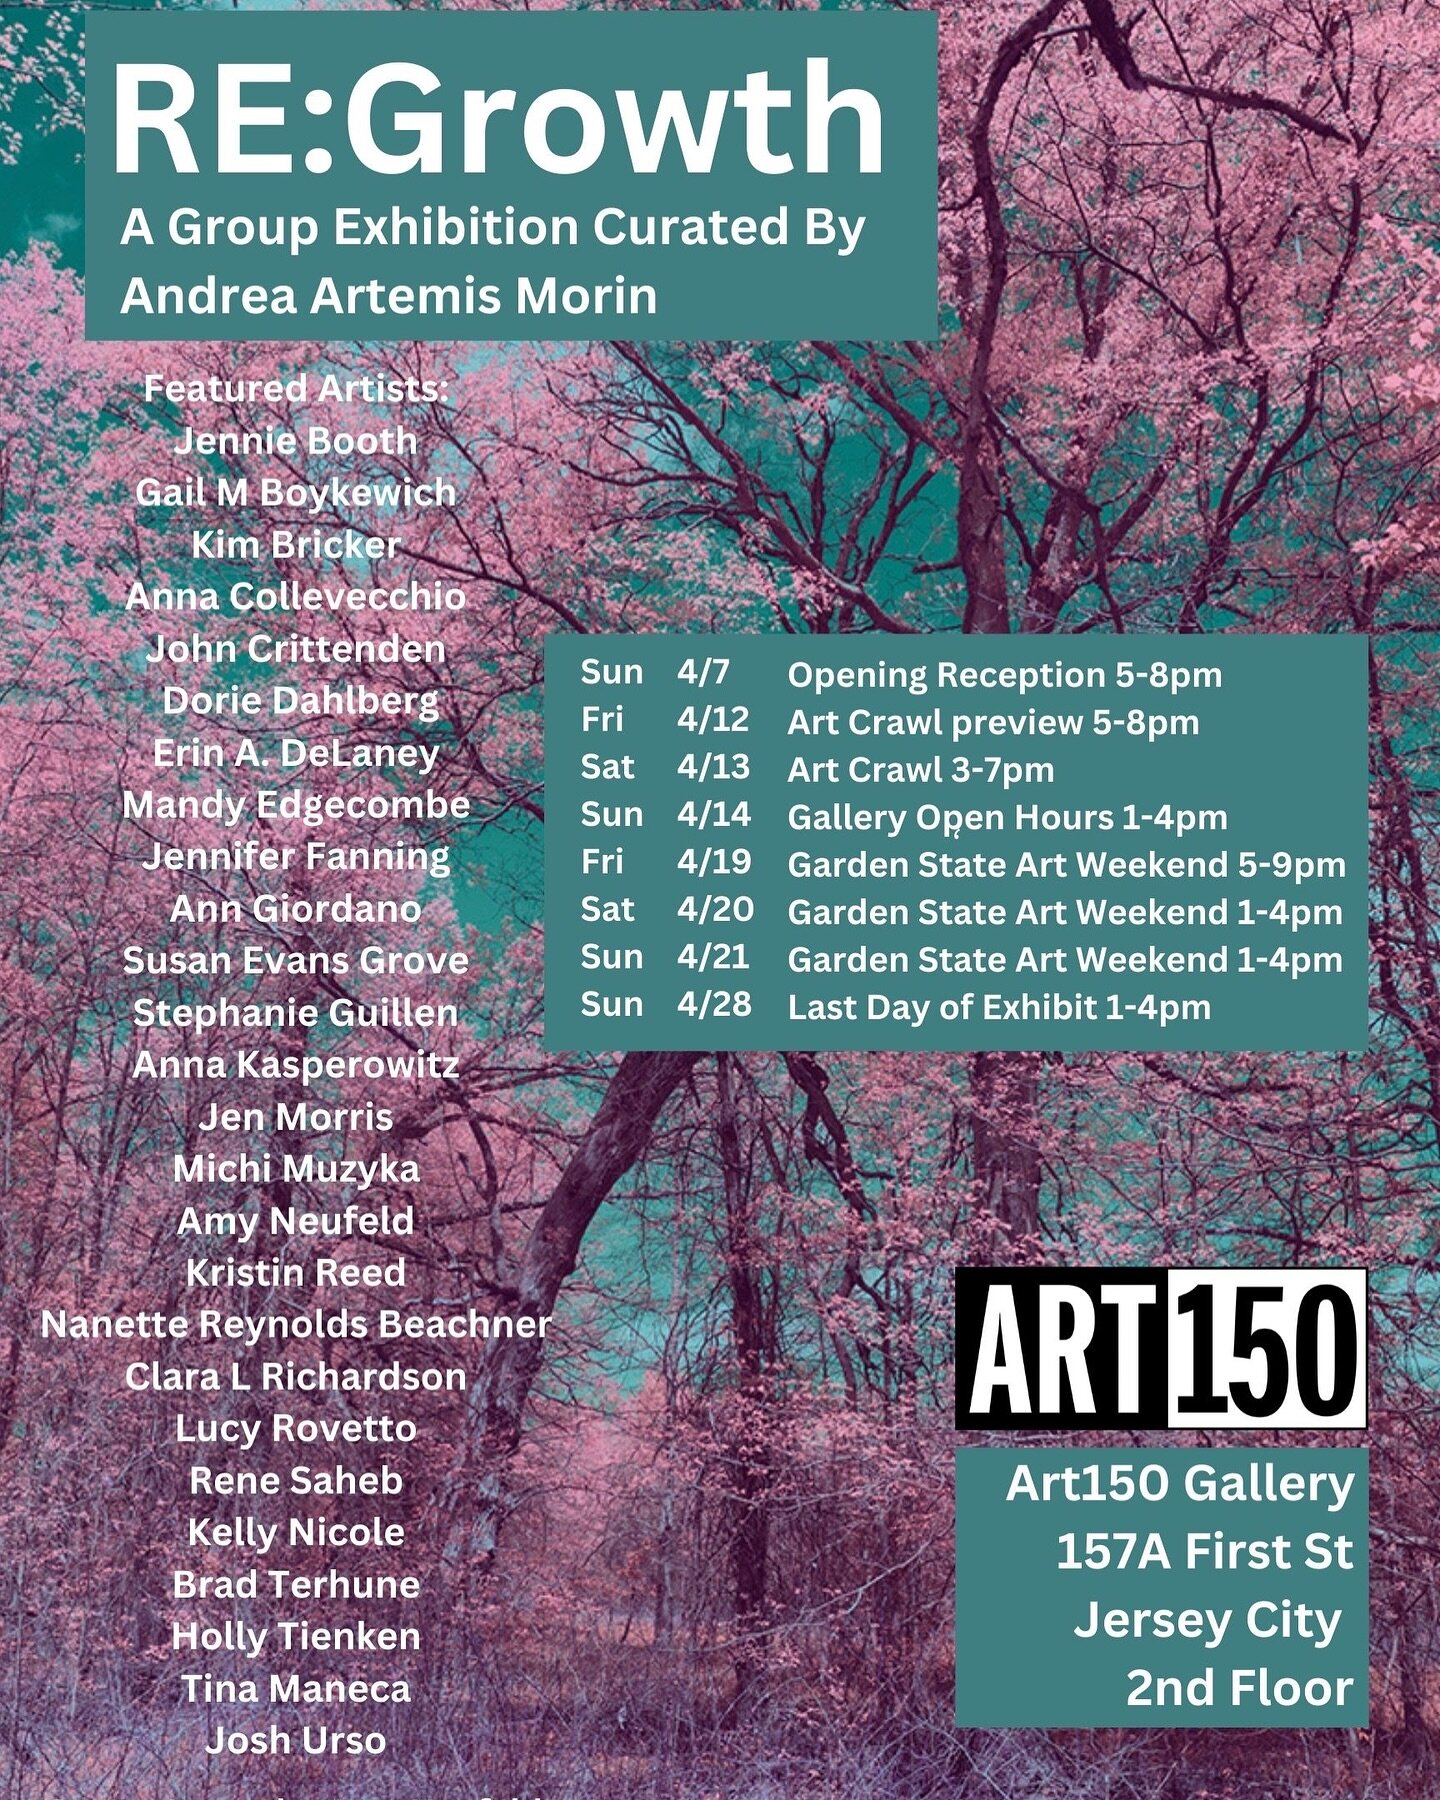 I&rsquo;m excited to be a part of the RE: Growth show, opening this weekend. Come meet me and other amazing artists at @art150jc on Sunday! Curated by @andreaartemis 

#artistsoninstagram #artcollector #artgallery #artshow #njartists #jerseycityart